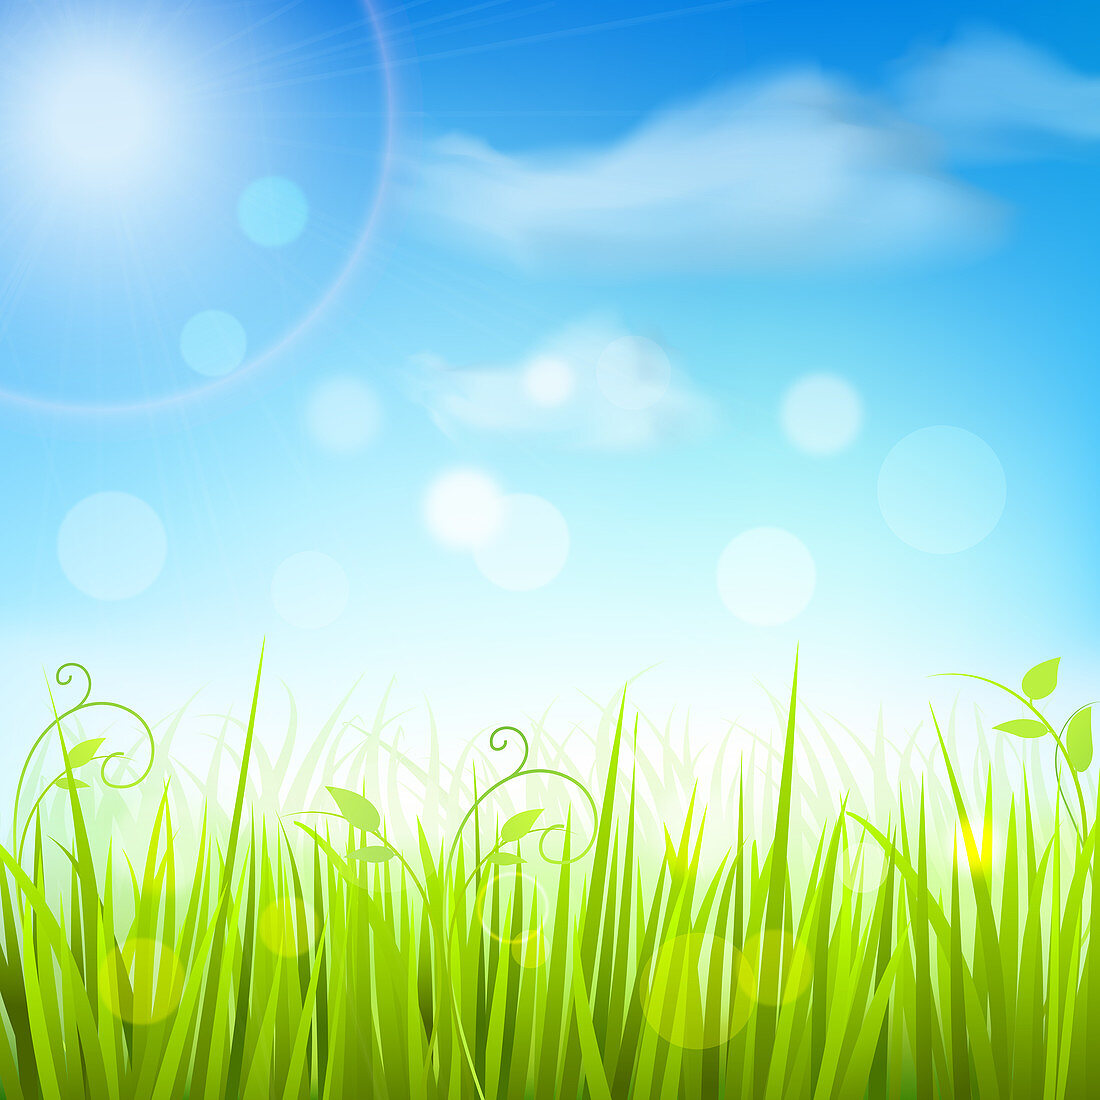 Grass and blue sky, illustration